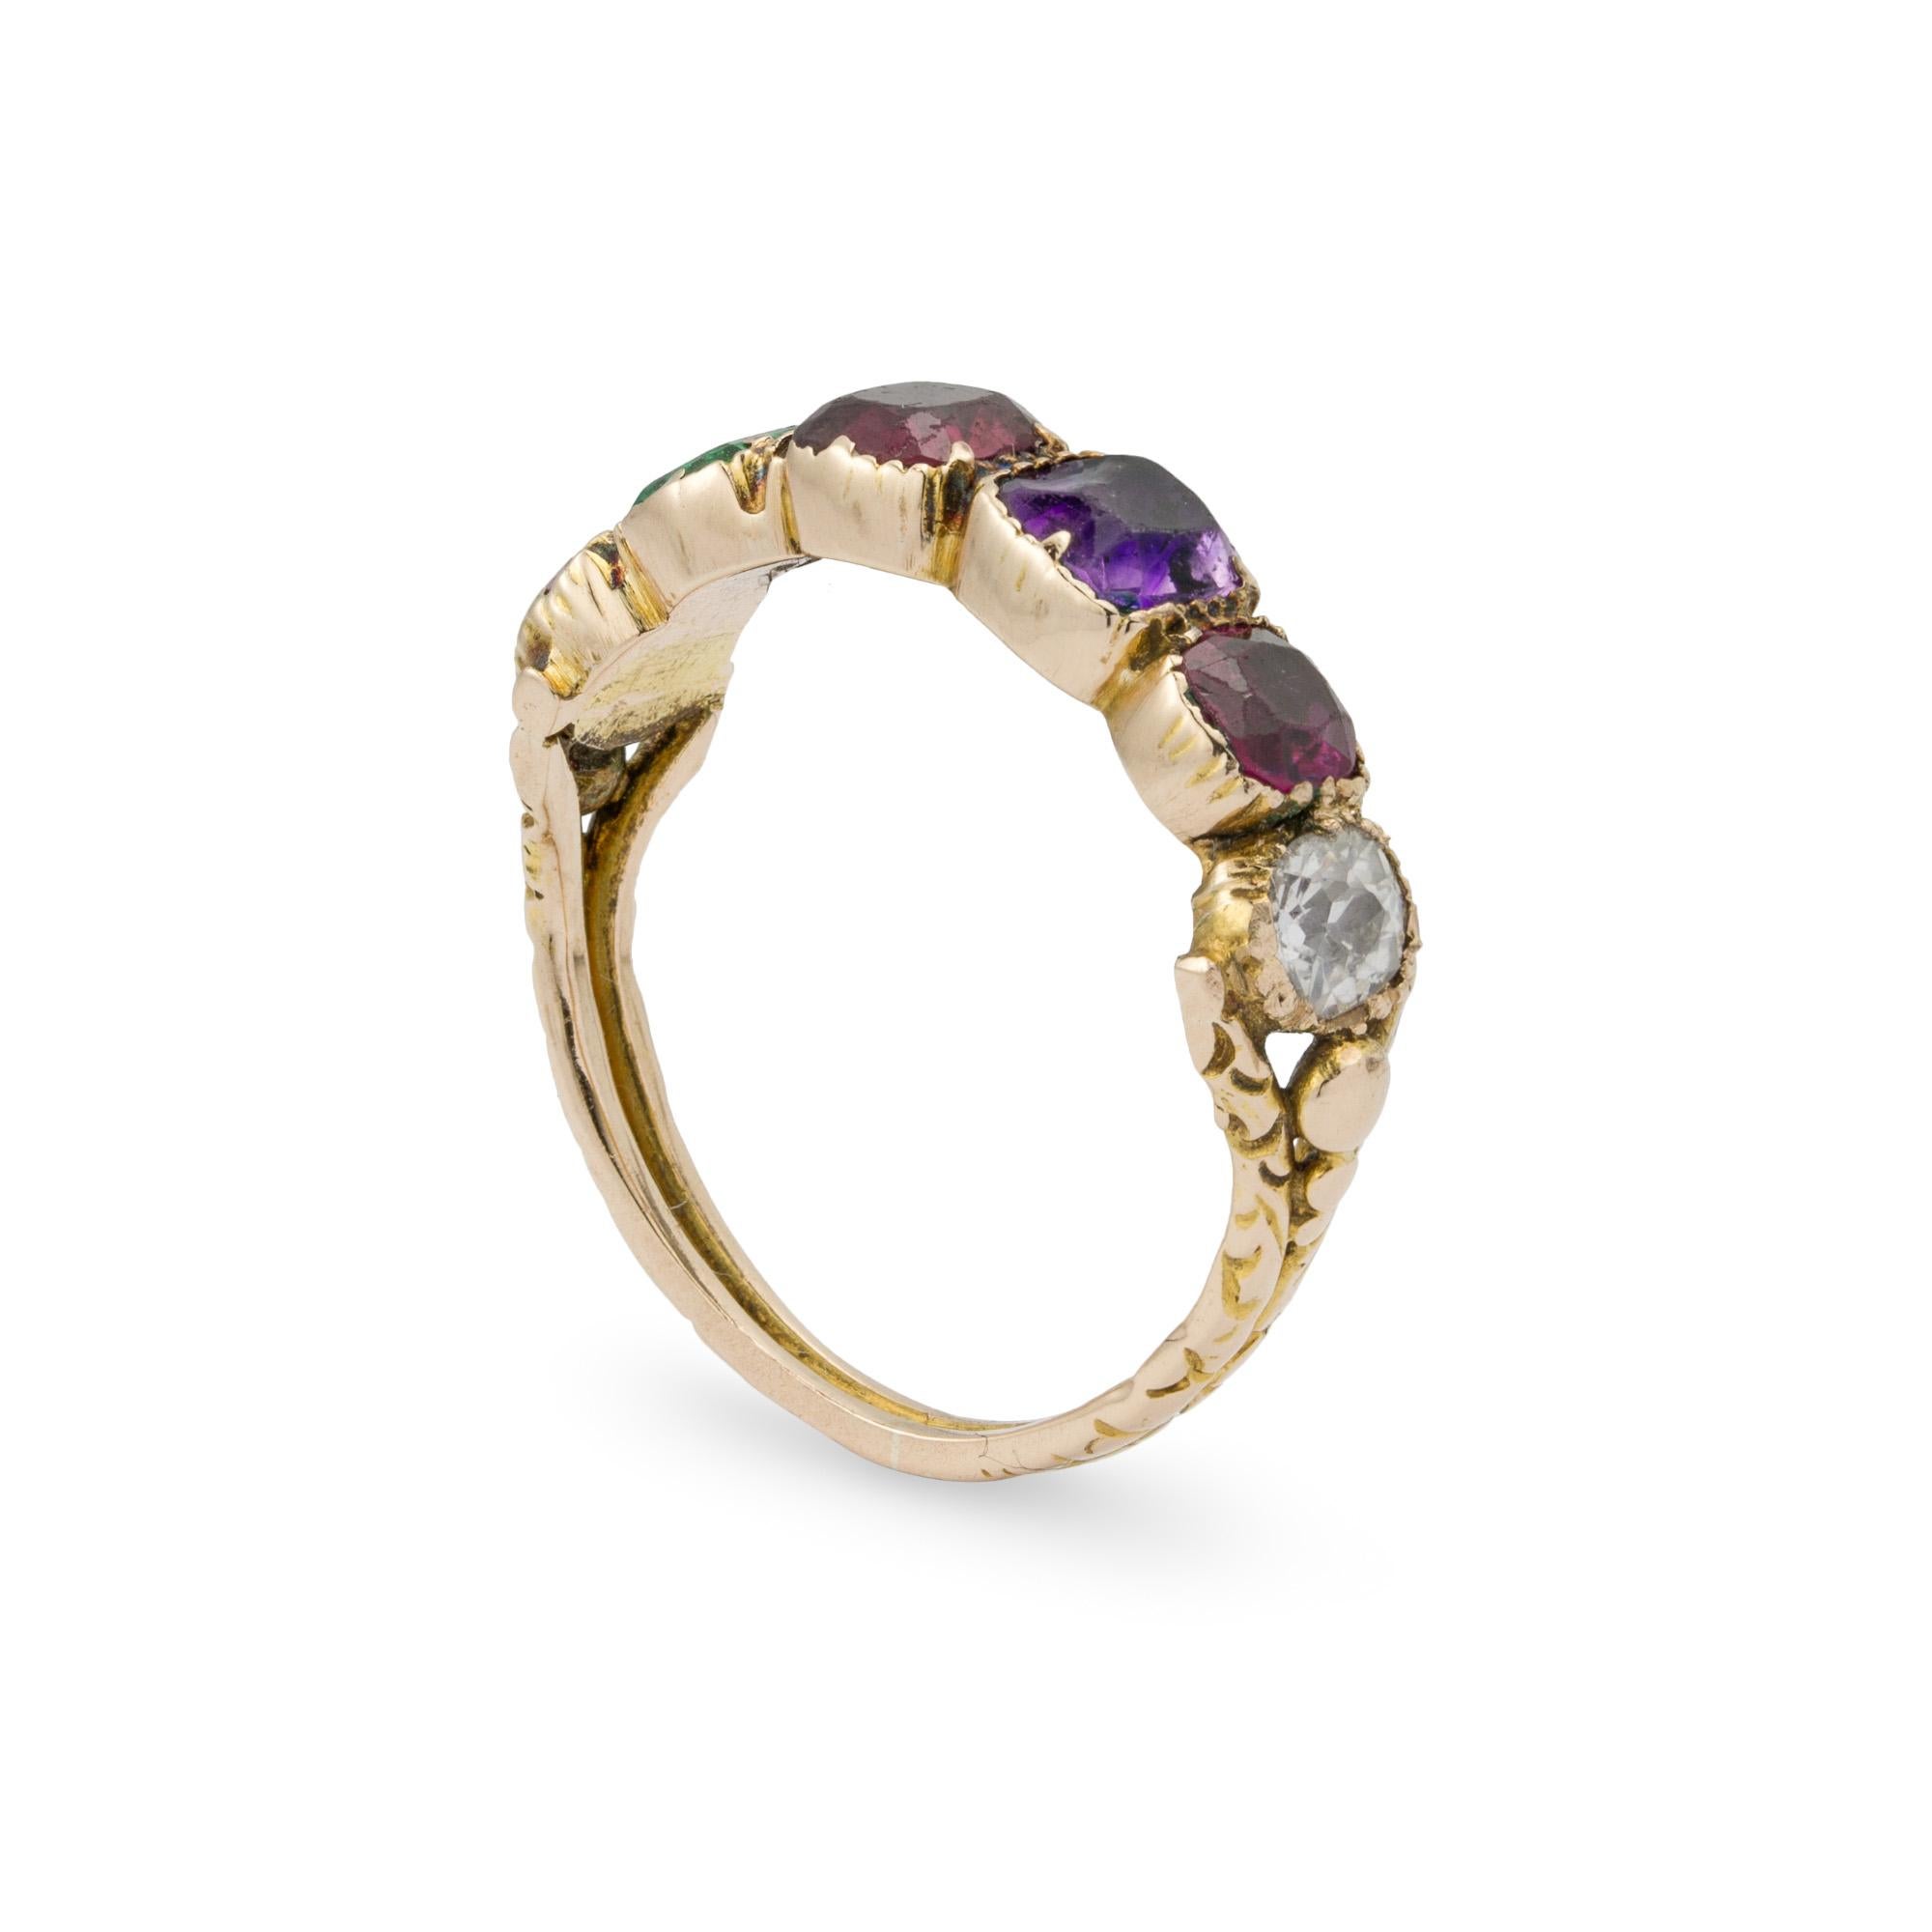 A Georgian regard ring, set with ruby, emerald, garnet, amethyst, ruby and diamond spelling REGARD, all in a closed back setting, with open-work shoulders to a decorated ribbed shank all in yellow gold, circa 1830, the head measuring 0.5x2cm, gross